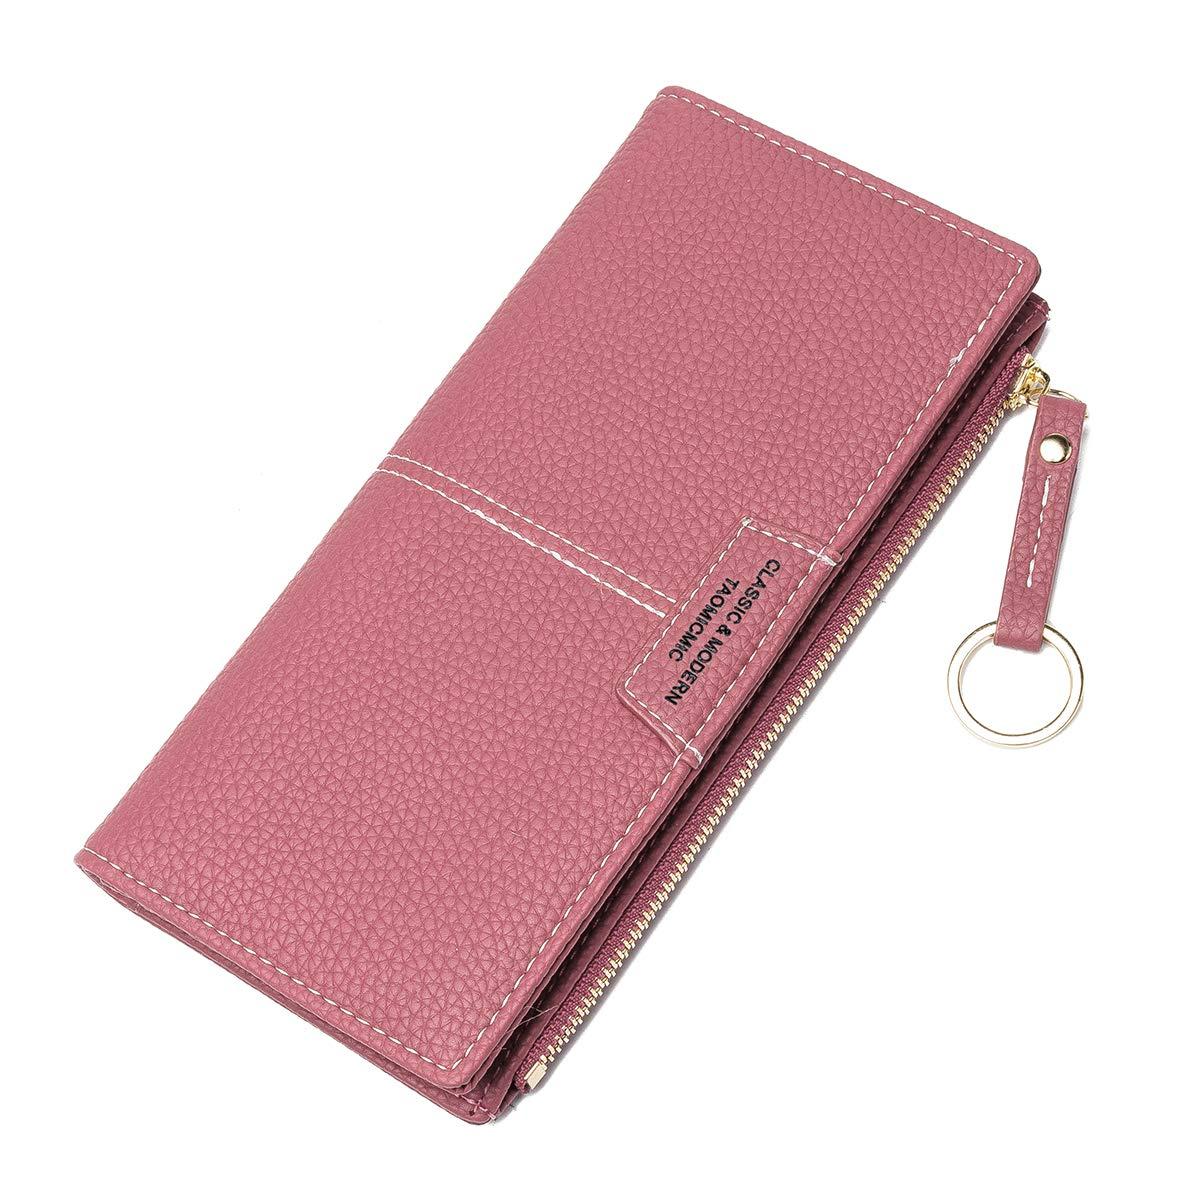 

JOSEKO Women's Small / Long Purse with Multiple Slots Wallet PU Leather Card Holder Purse Women with Key Ring for Girls